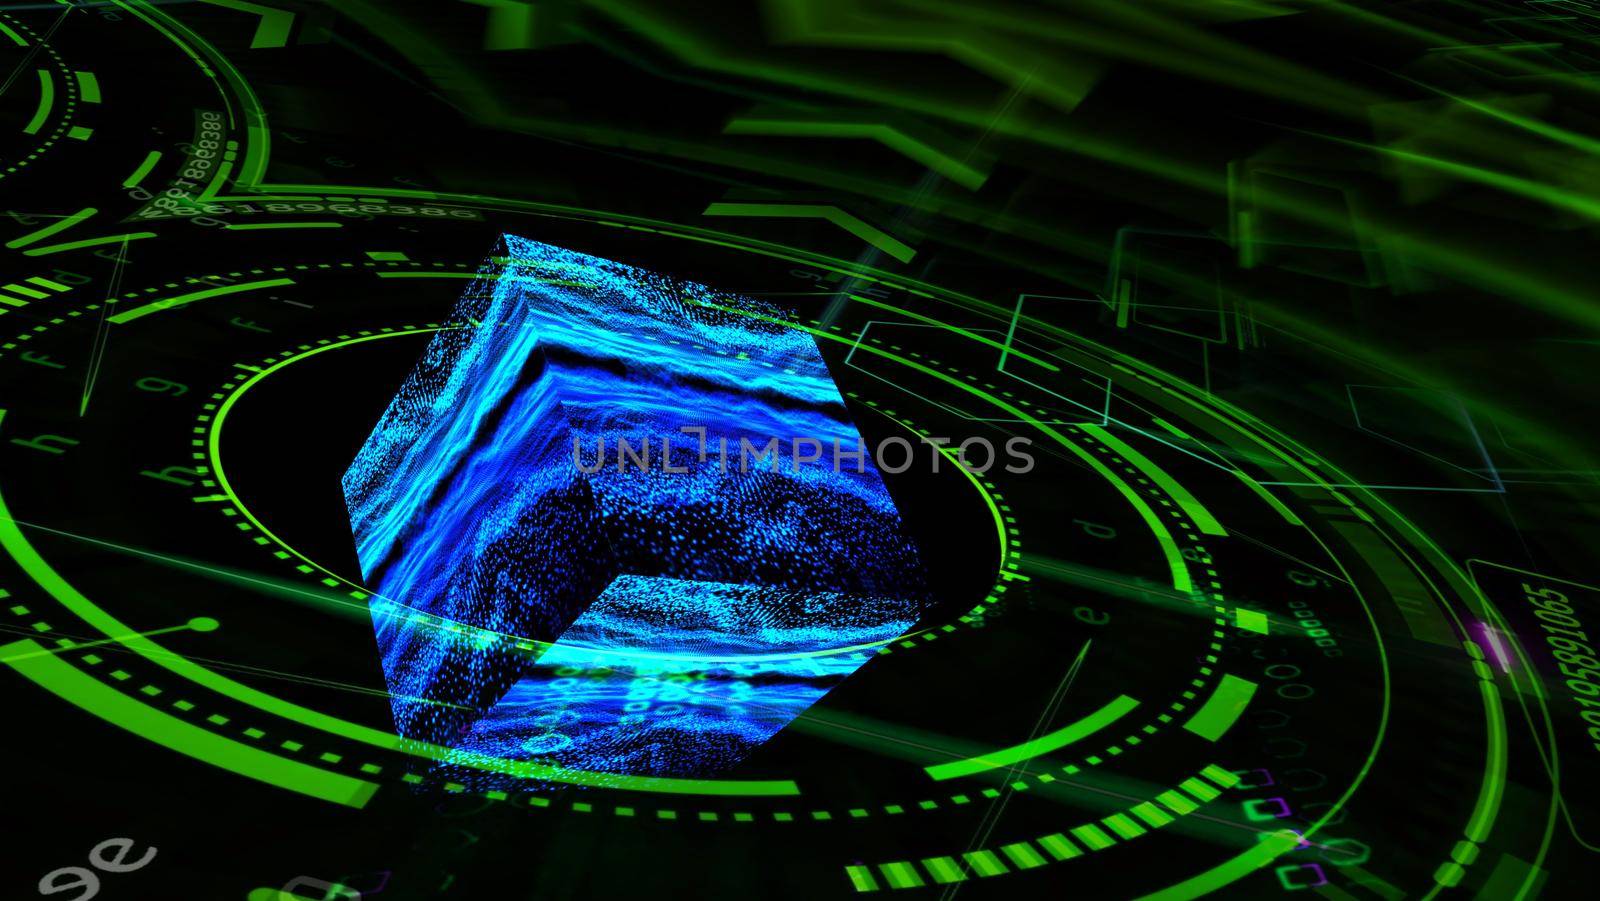 Quantum futuristic technology computer green ring with digital cube reflection by Darkfox